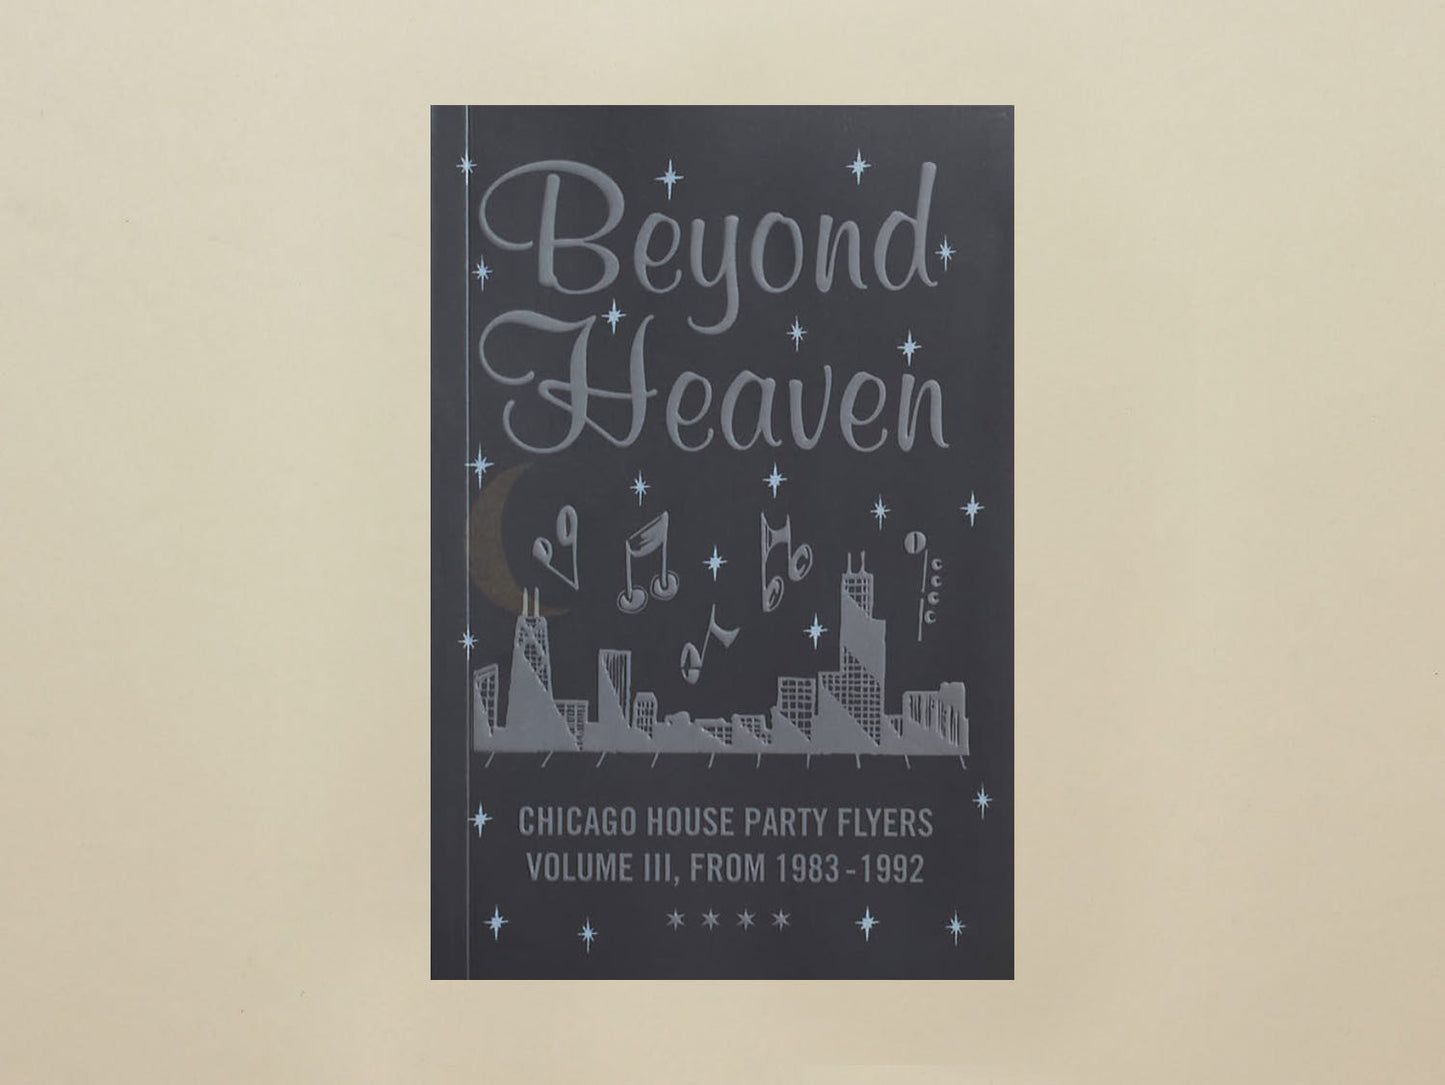 BEYOND HEAVEN: CHICAGO HOUSE PARTY FLYERS — VOLUME III, FROM 1983-1992